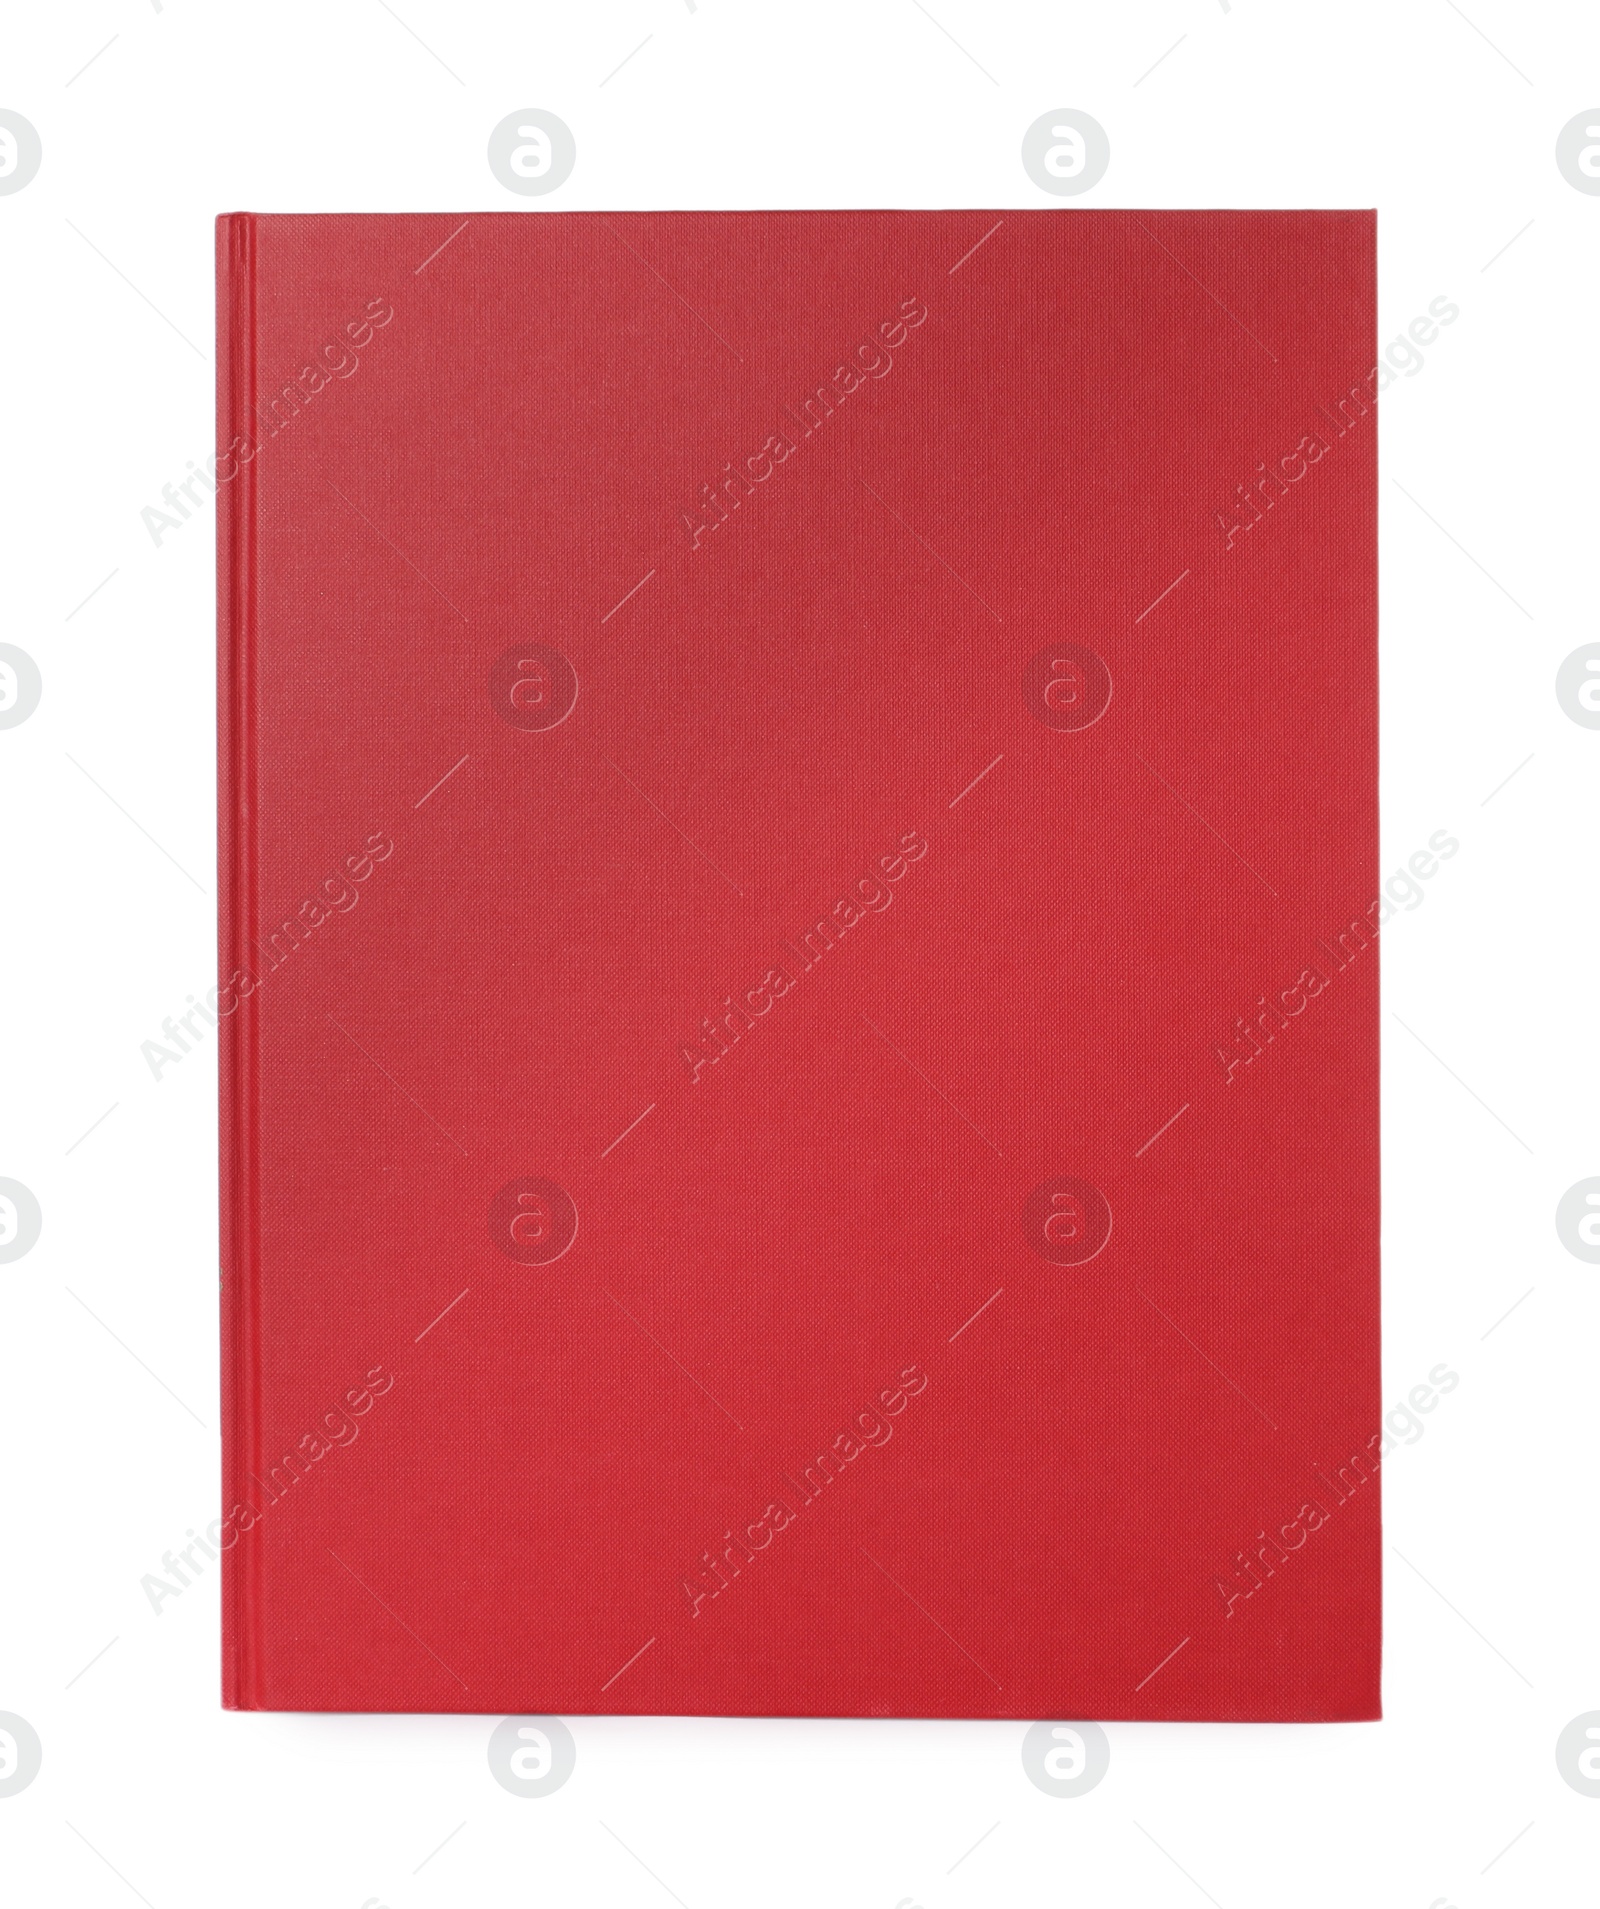 Photo of Closed book with red hard cover isolated on white